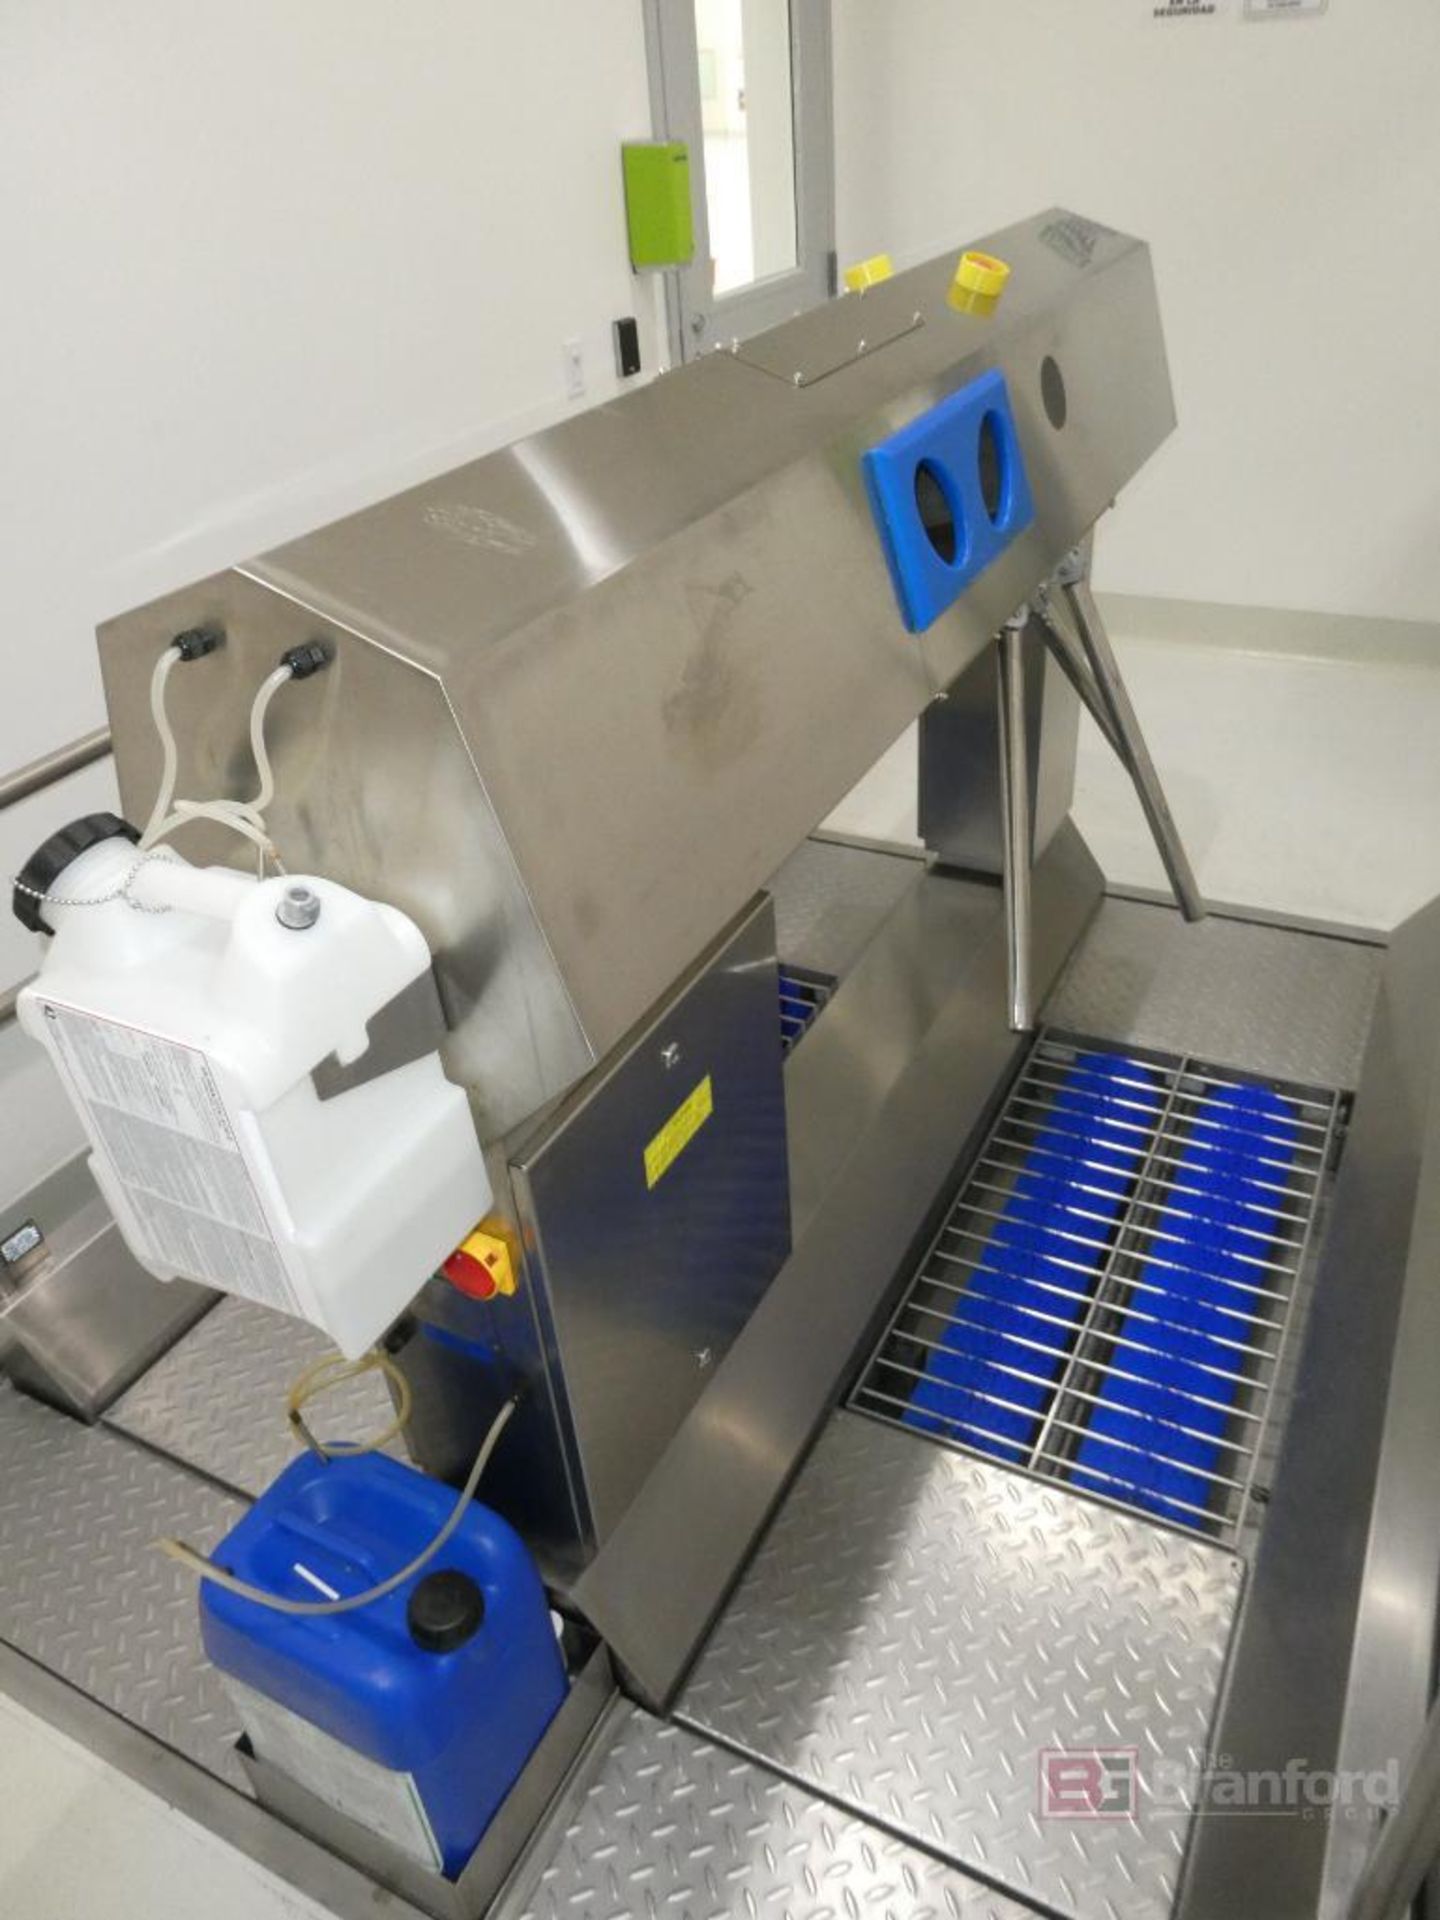 2020 ITEC Frontmatec Hygiene Systems Automatic Walk-Through Sole and Boot Cleaning Machine - Image 3 of 7